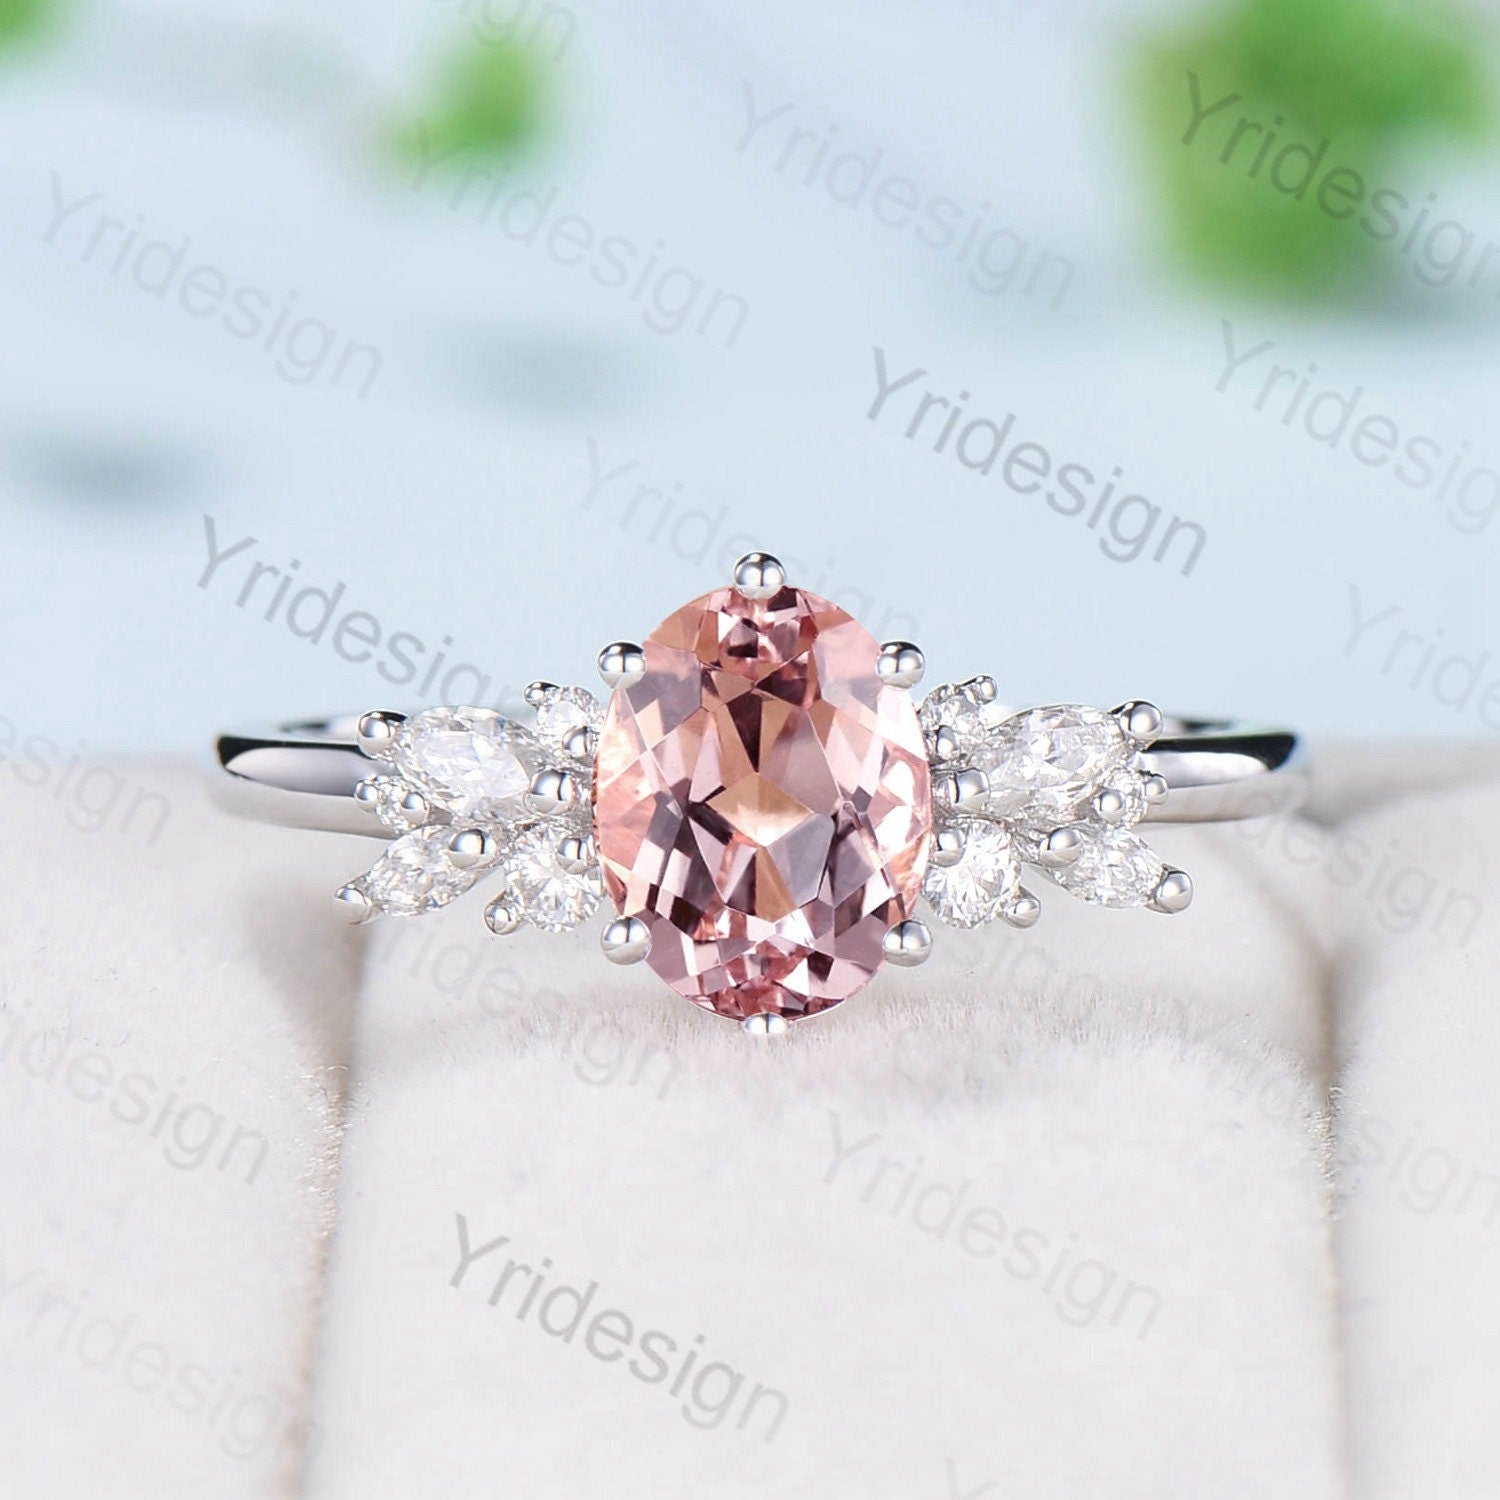 Pink Morganite Engagement Ring,10mm 2.6ct Trillion Cut Stone,Solid 14K Rose  Gold,Wedding Promise Band | Amazon.com